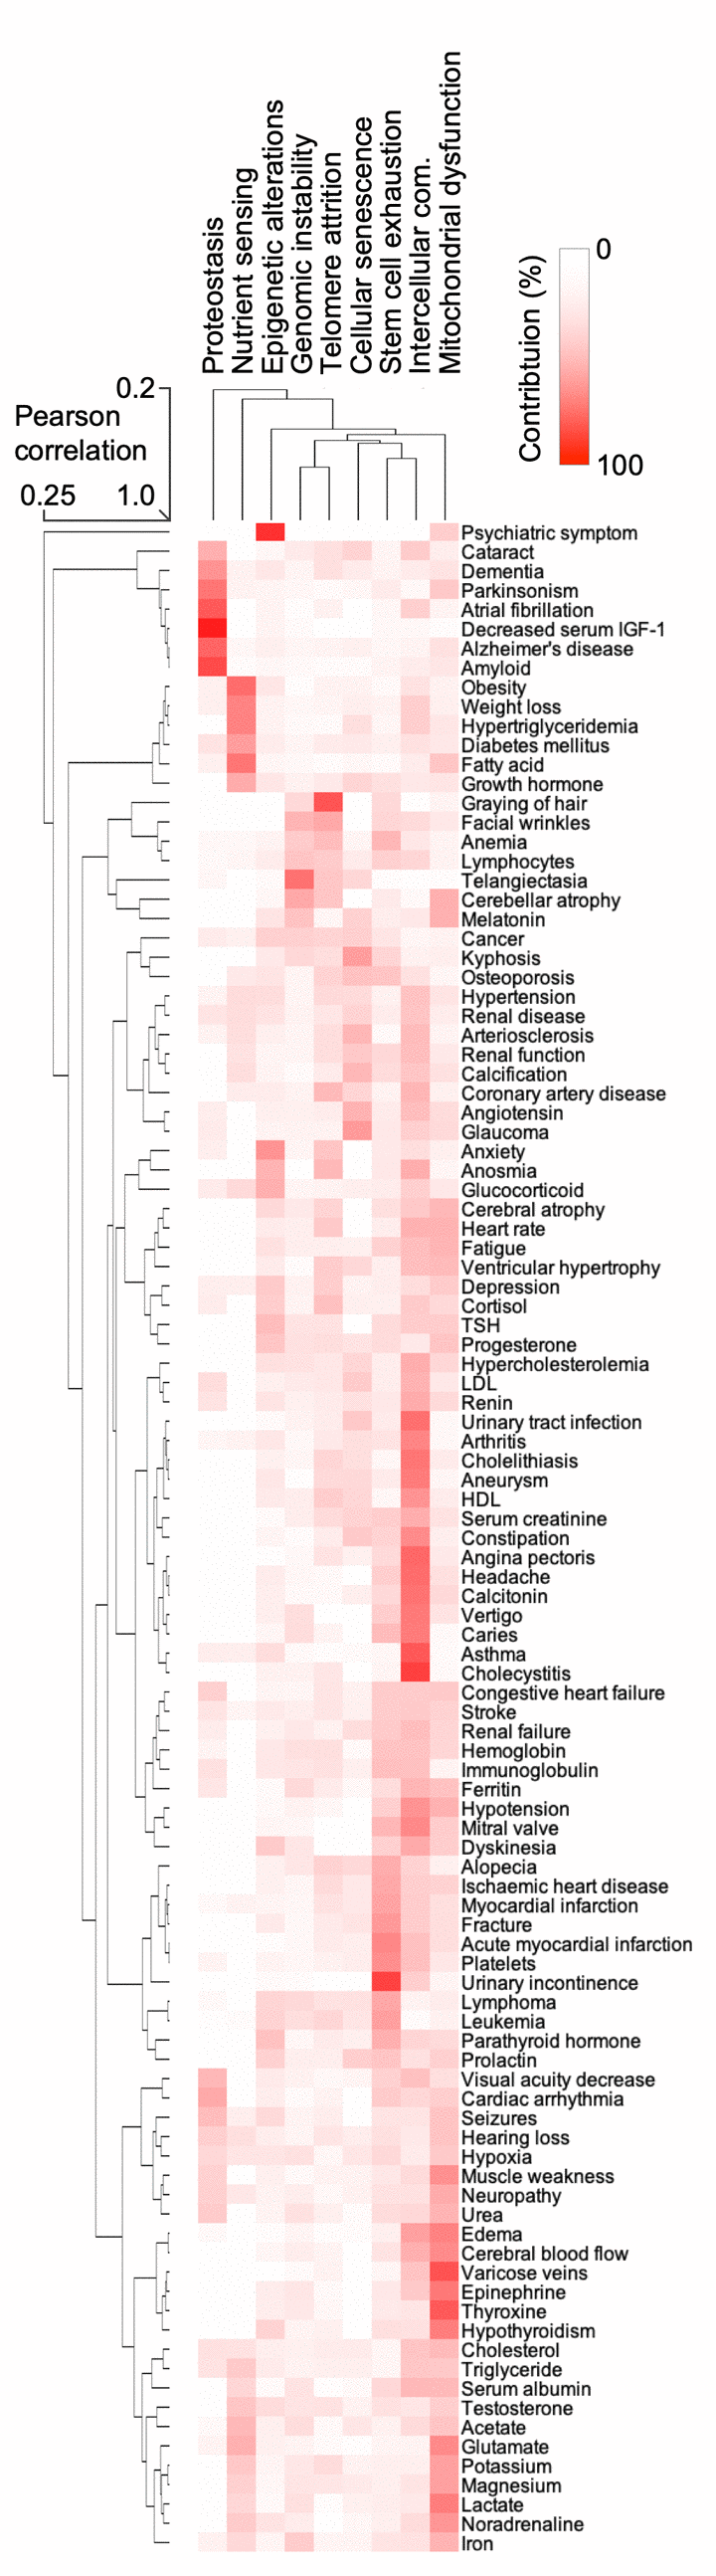 The hallmarks of aging are associated with certain human features. Heatmap and cluster analysis of the association between age-associated clinical terms and hallmarks of aging.